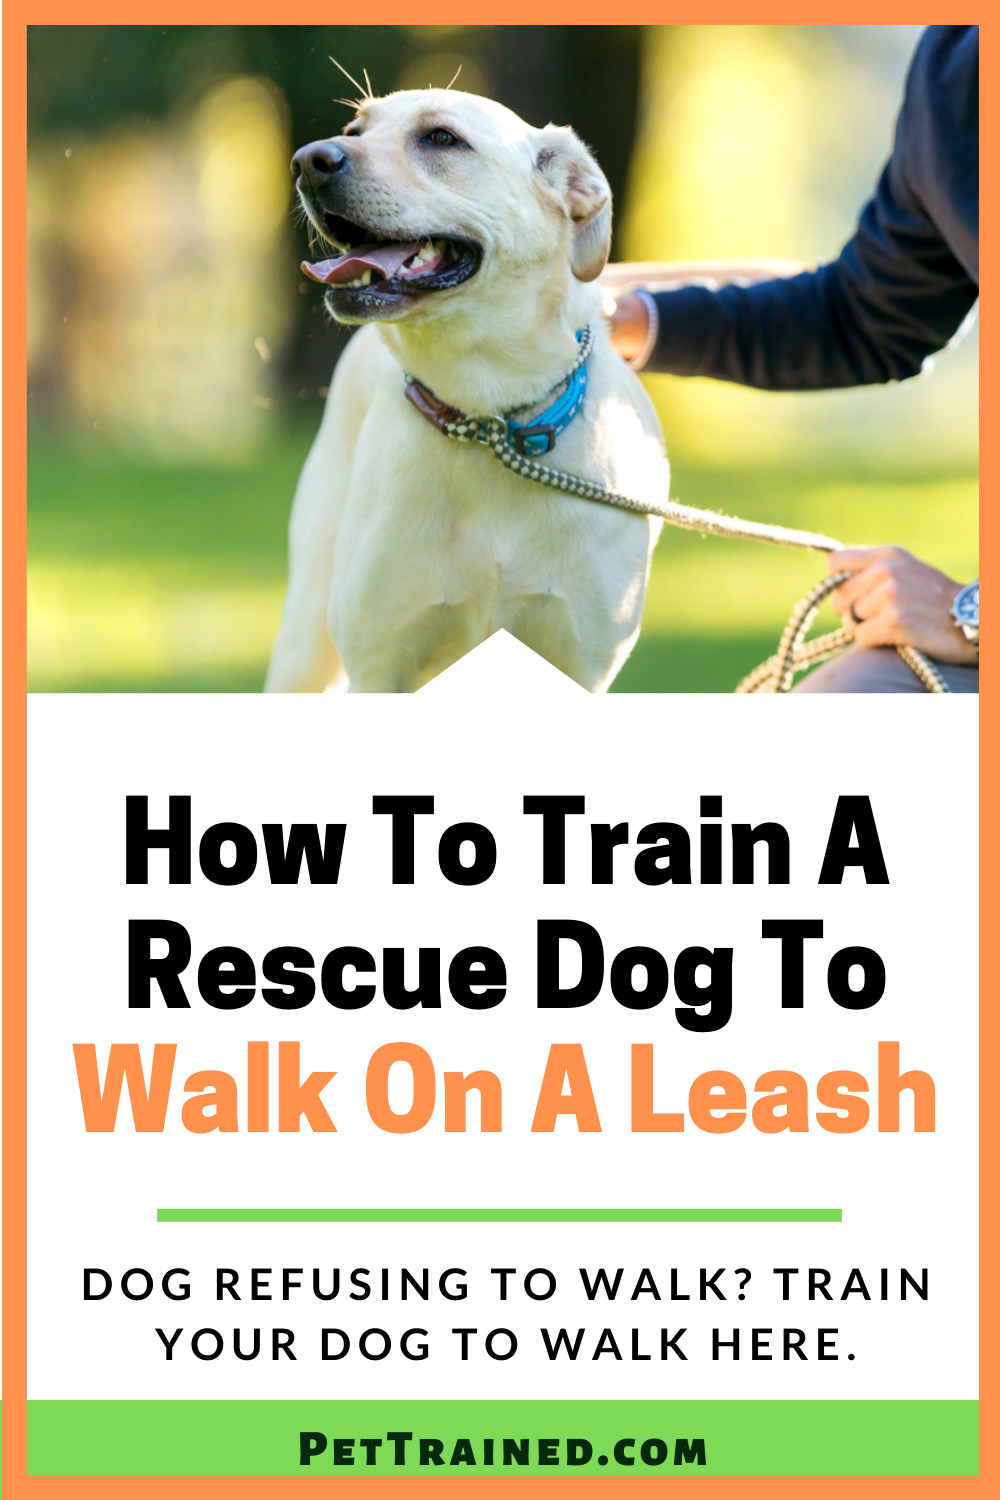 dog training tips to teach adopted dog to walk on a leash